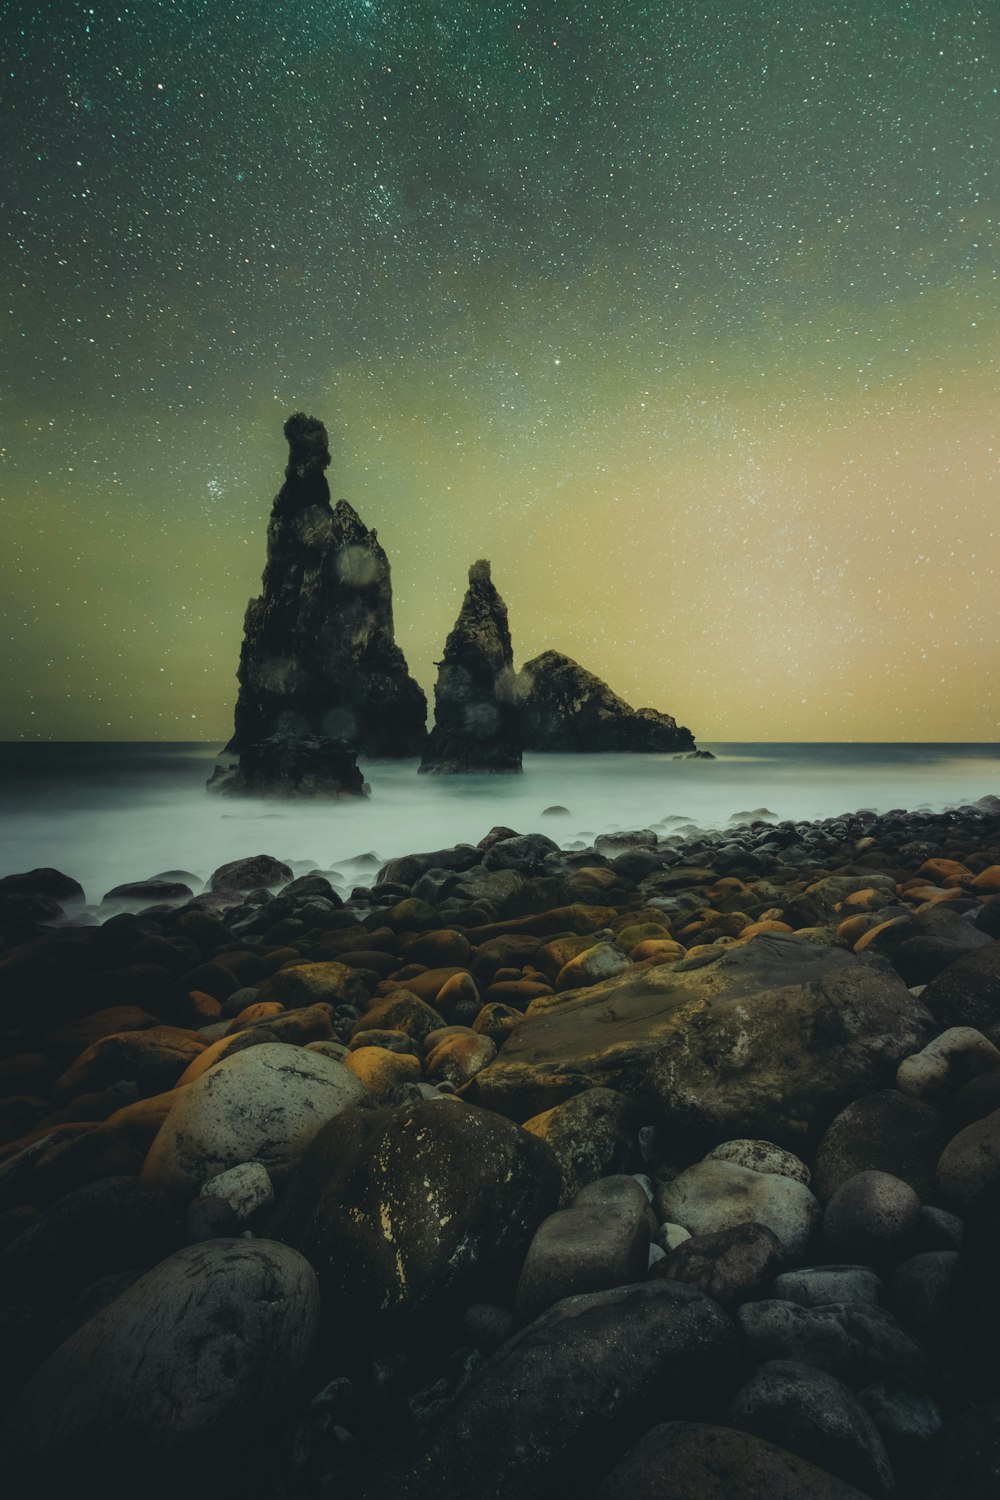 a rocky beach under a night sky filled with stars